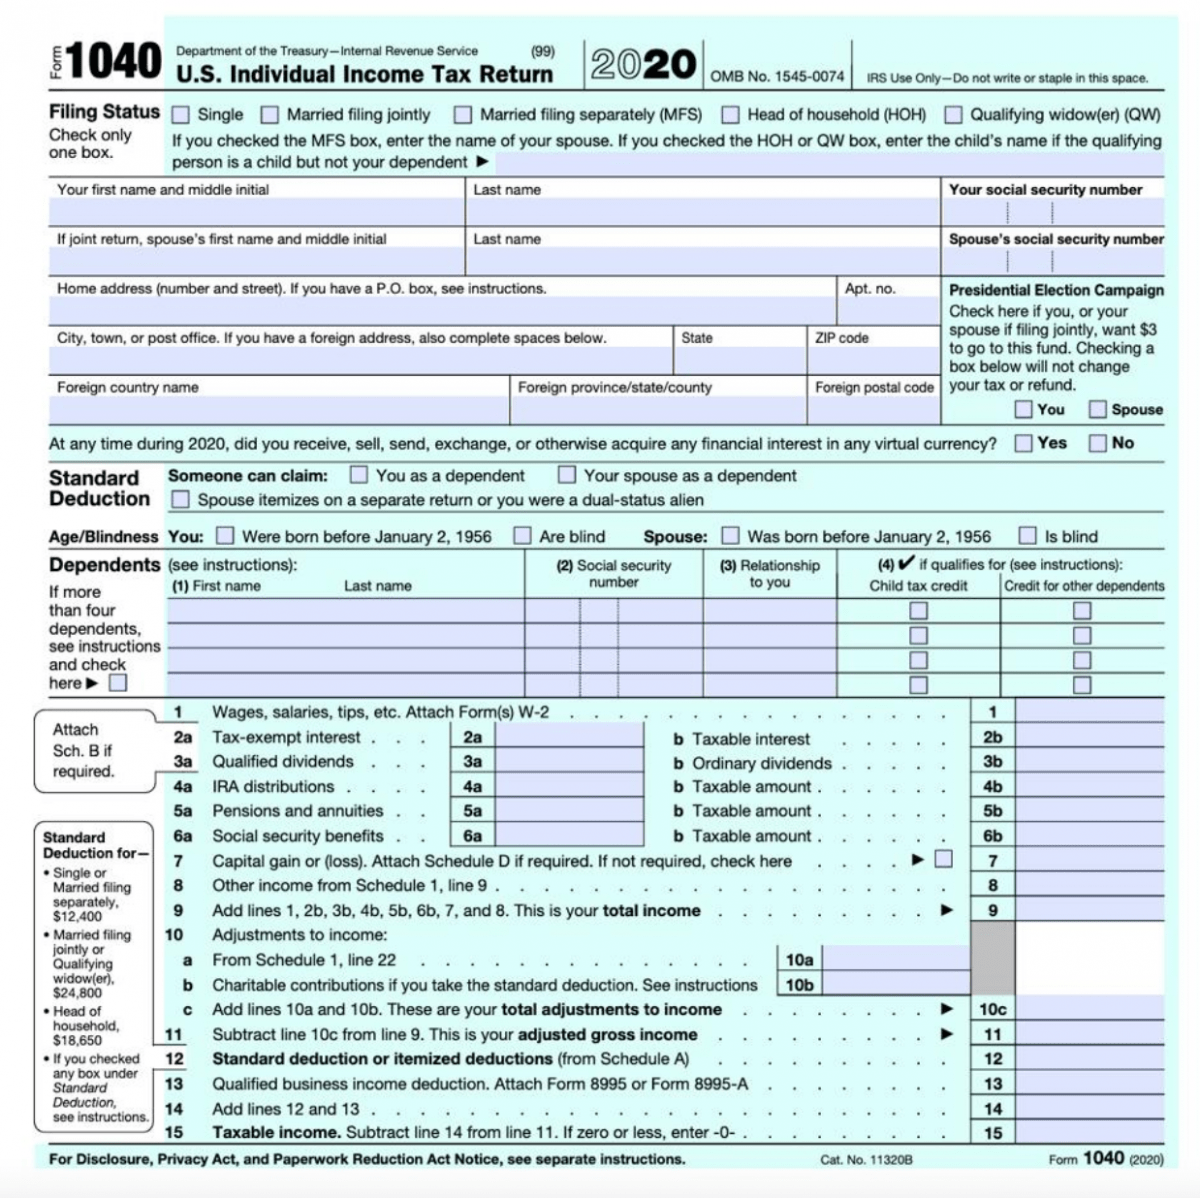 Irs 2022 Form 1040 Schedule 1 Irs Releases Form 1040 For 2020 Tax Year | Taxgirl